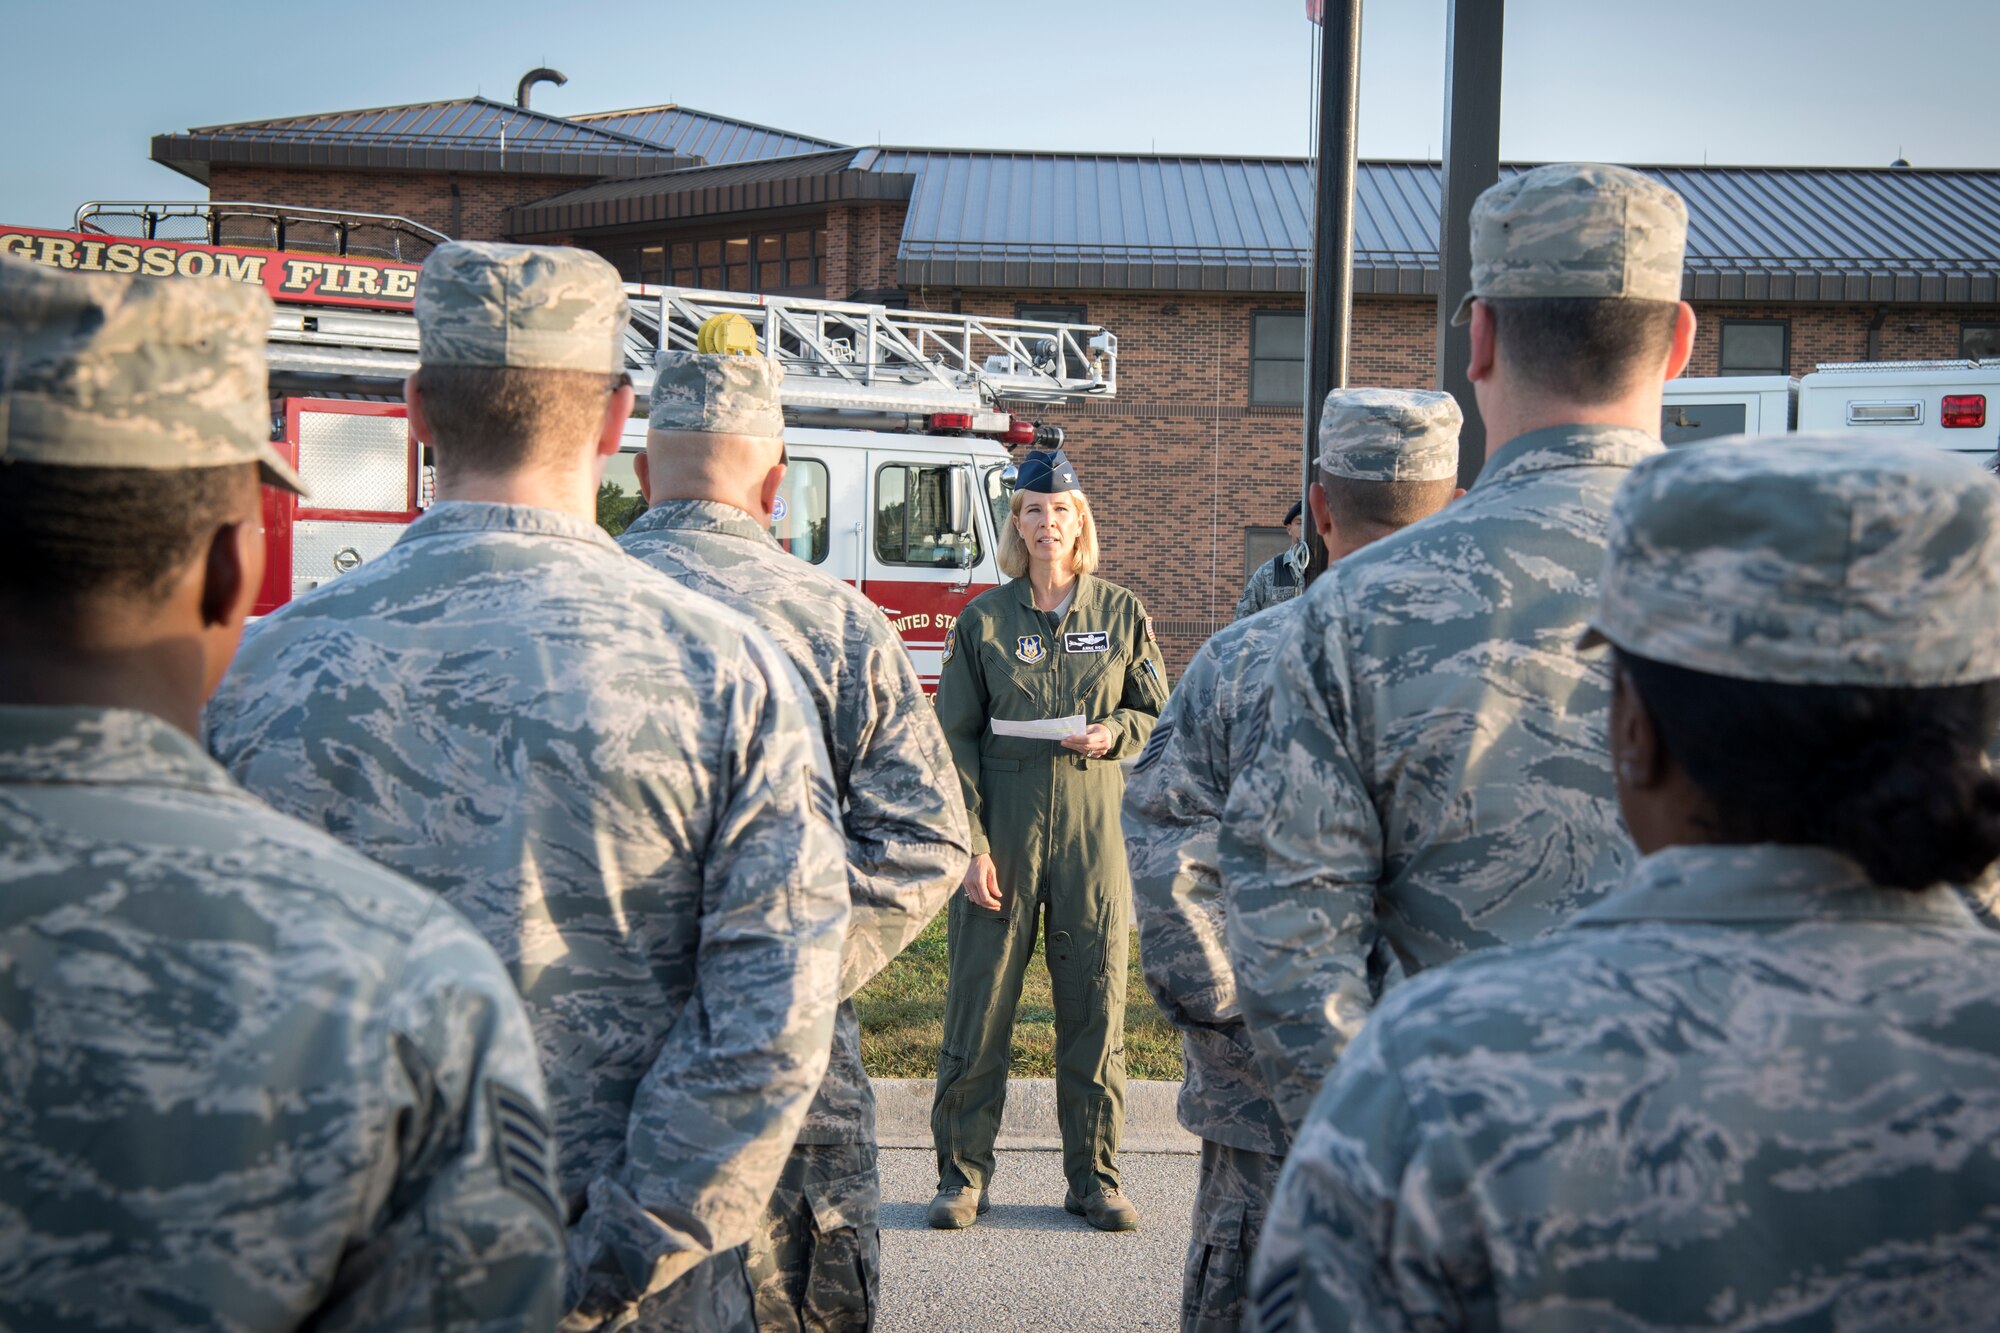 Col. Anne Noel, 434th Air Refueling Wing vice commander, speaks to Airmen during a 9/11 memorial ceremony at Grissom Air Reserve Base, Ind. Sept. 11, 2018. During the ceremony, more than 50 firemen, police, Airmen, NCOs, Officers, and civilians came together to pay their respects. (U.S. Air Force Photo/Tech. Sgt. Benjamin Mota)